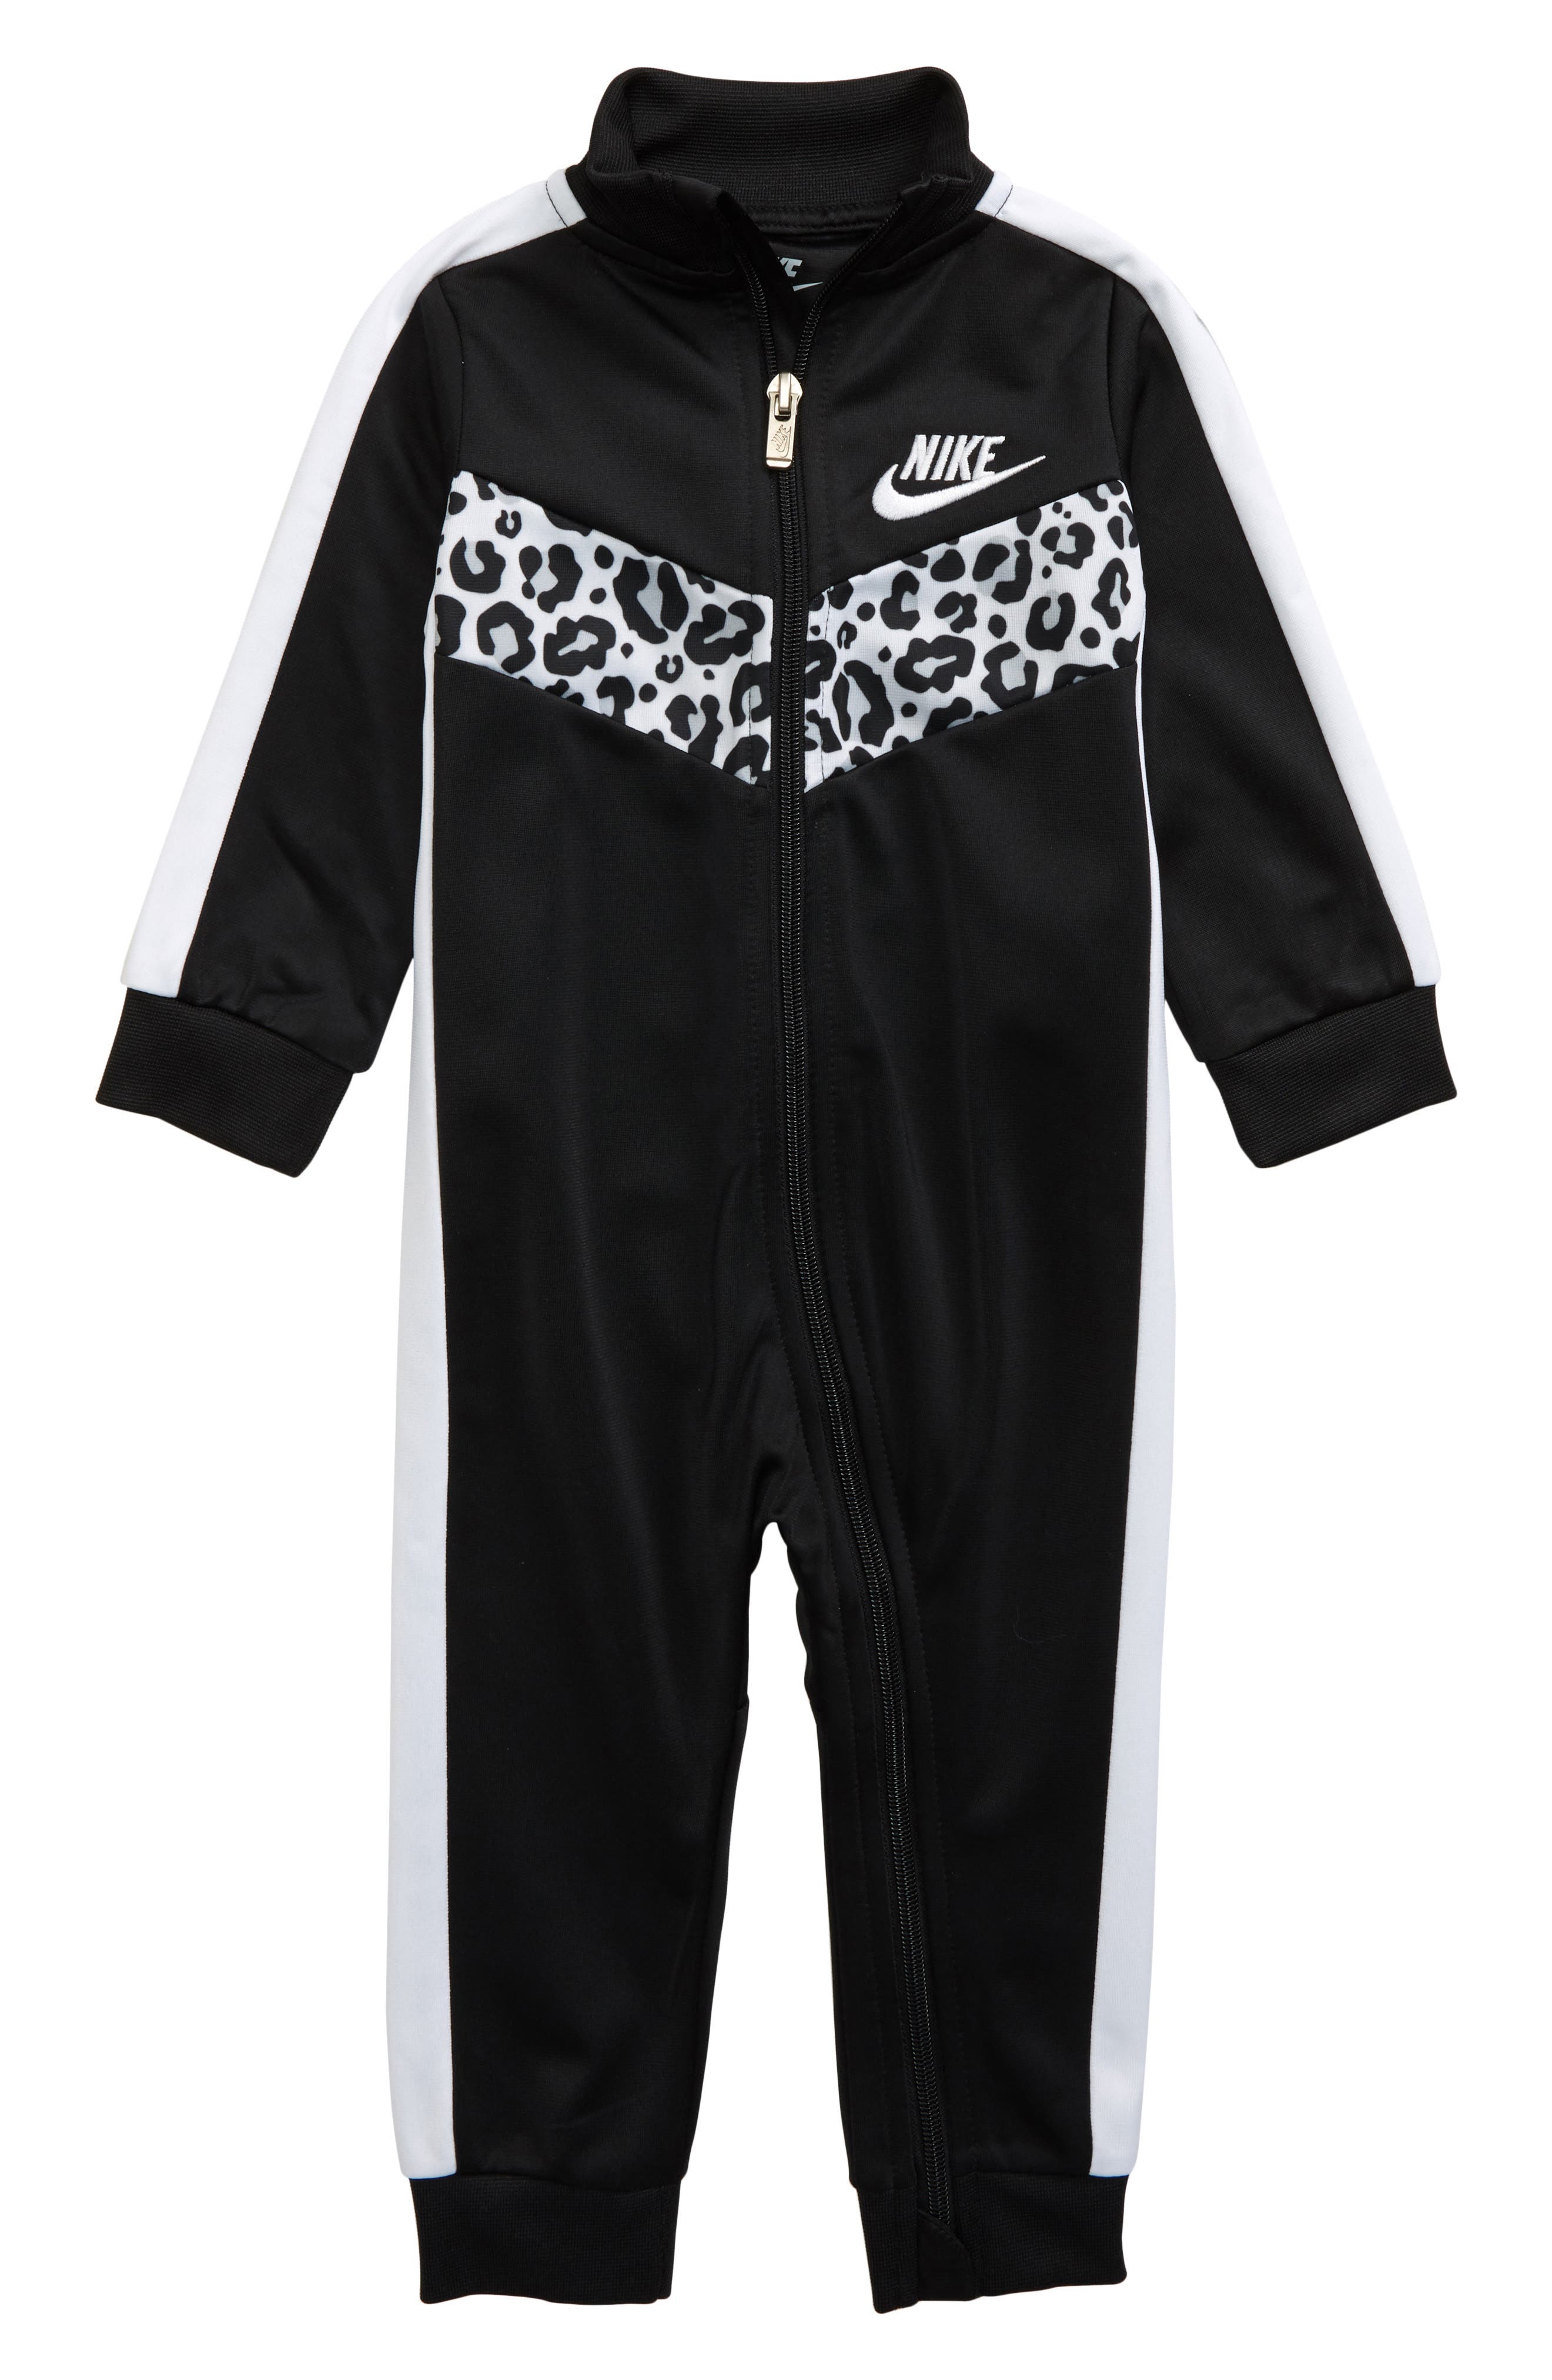 nike baby girl clothes clearance